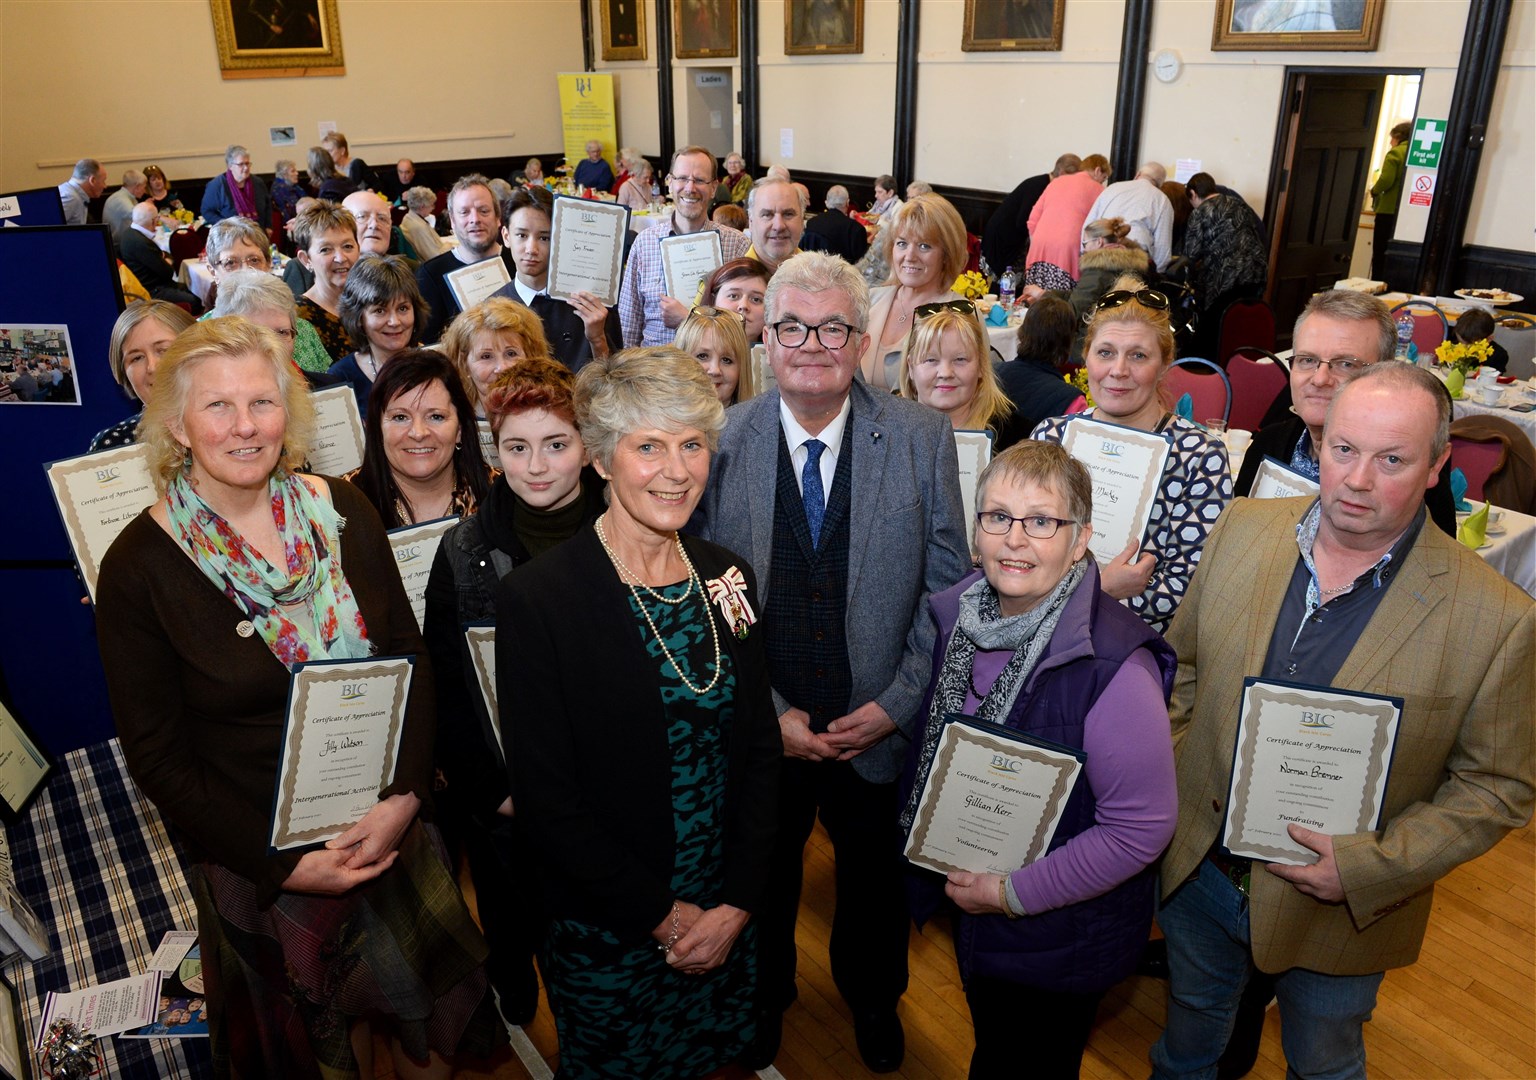 Black Isle Cares fifth birthday party at Fortrose Town Hall with Lord-Lieutenant Joanie Whiteford (centre), carers and fundraisers who received certificates of appreciation. Picture: Gary Anthony